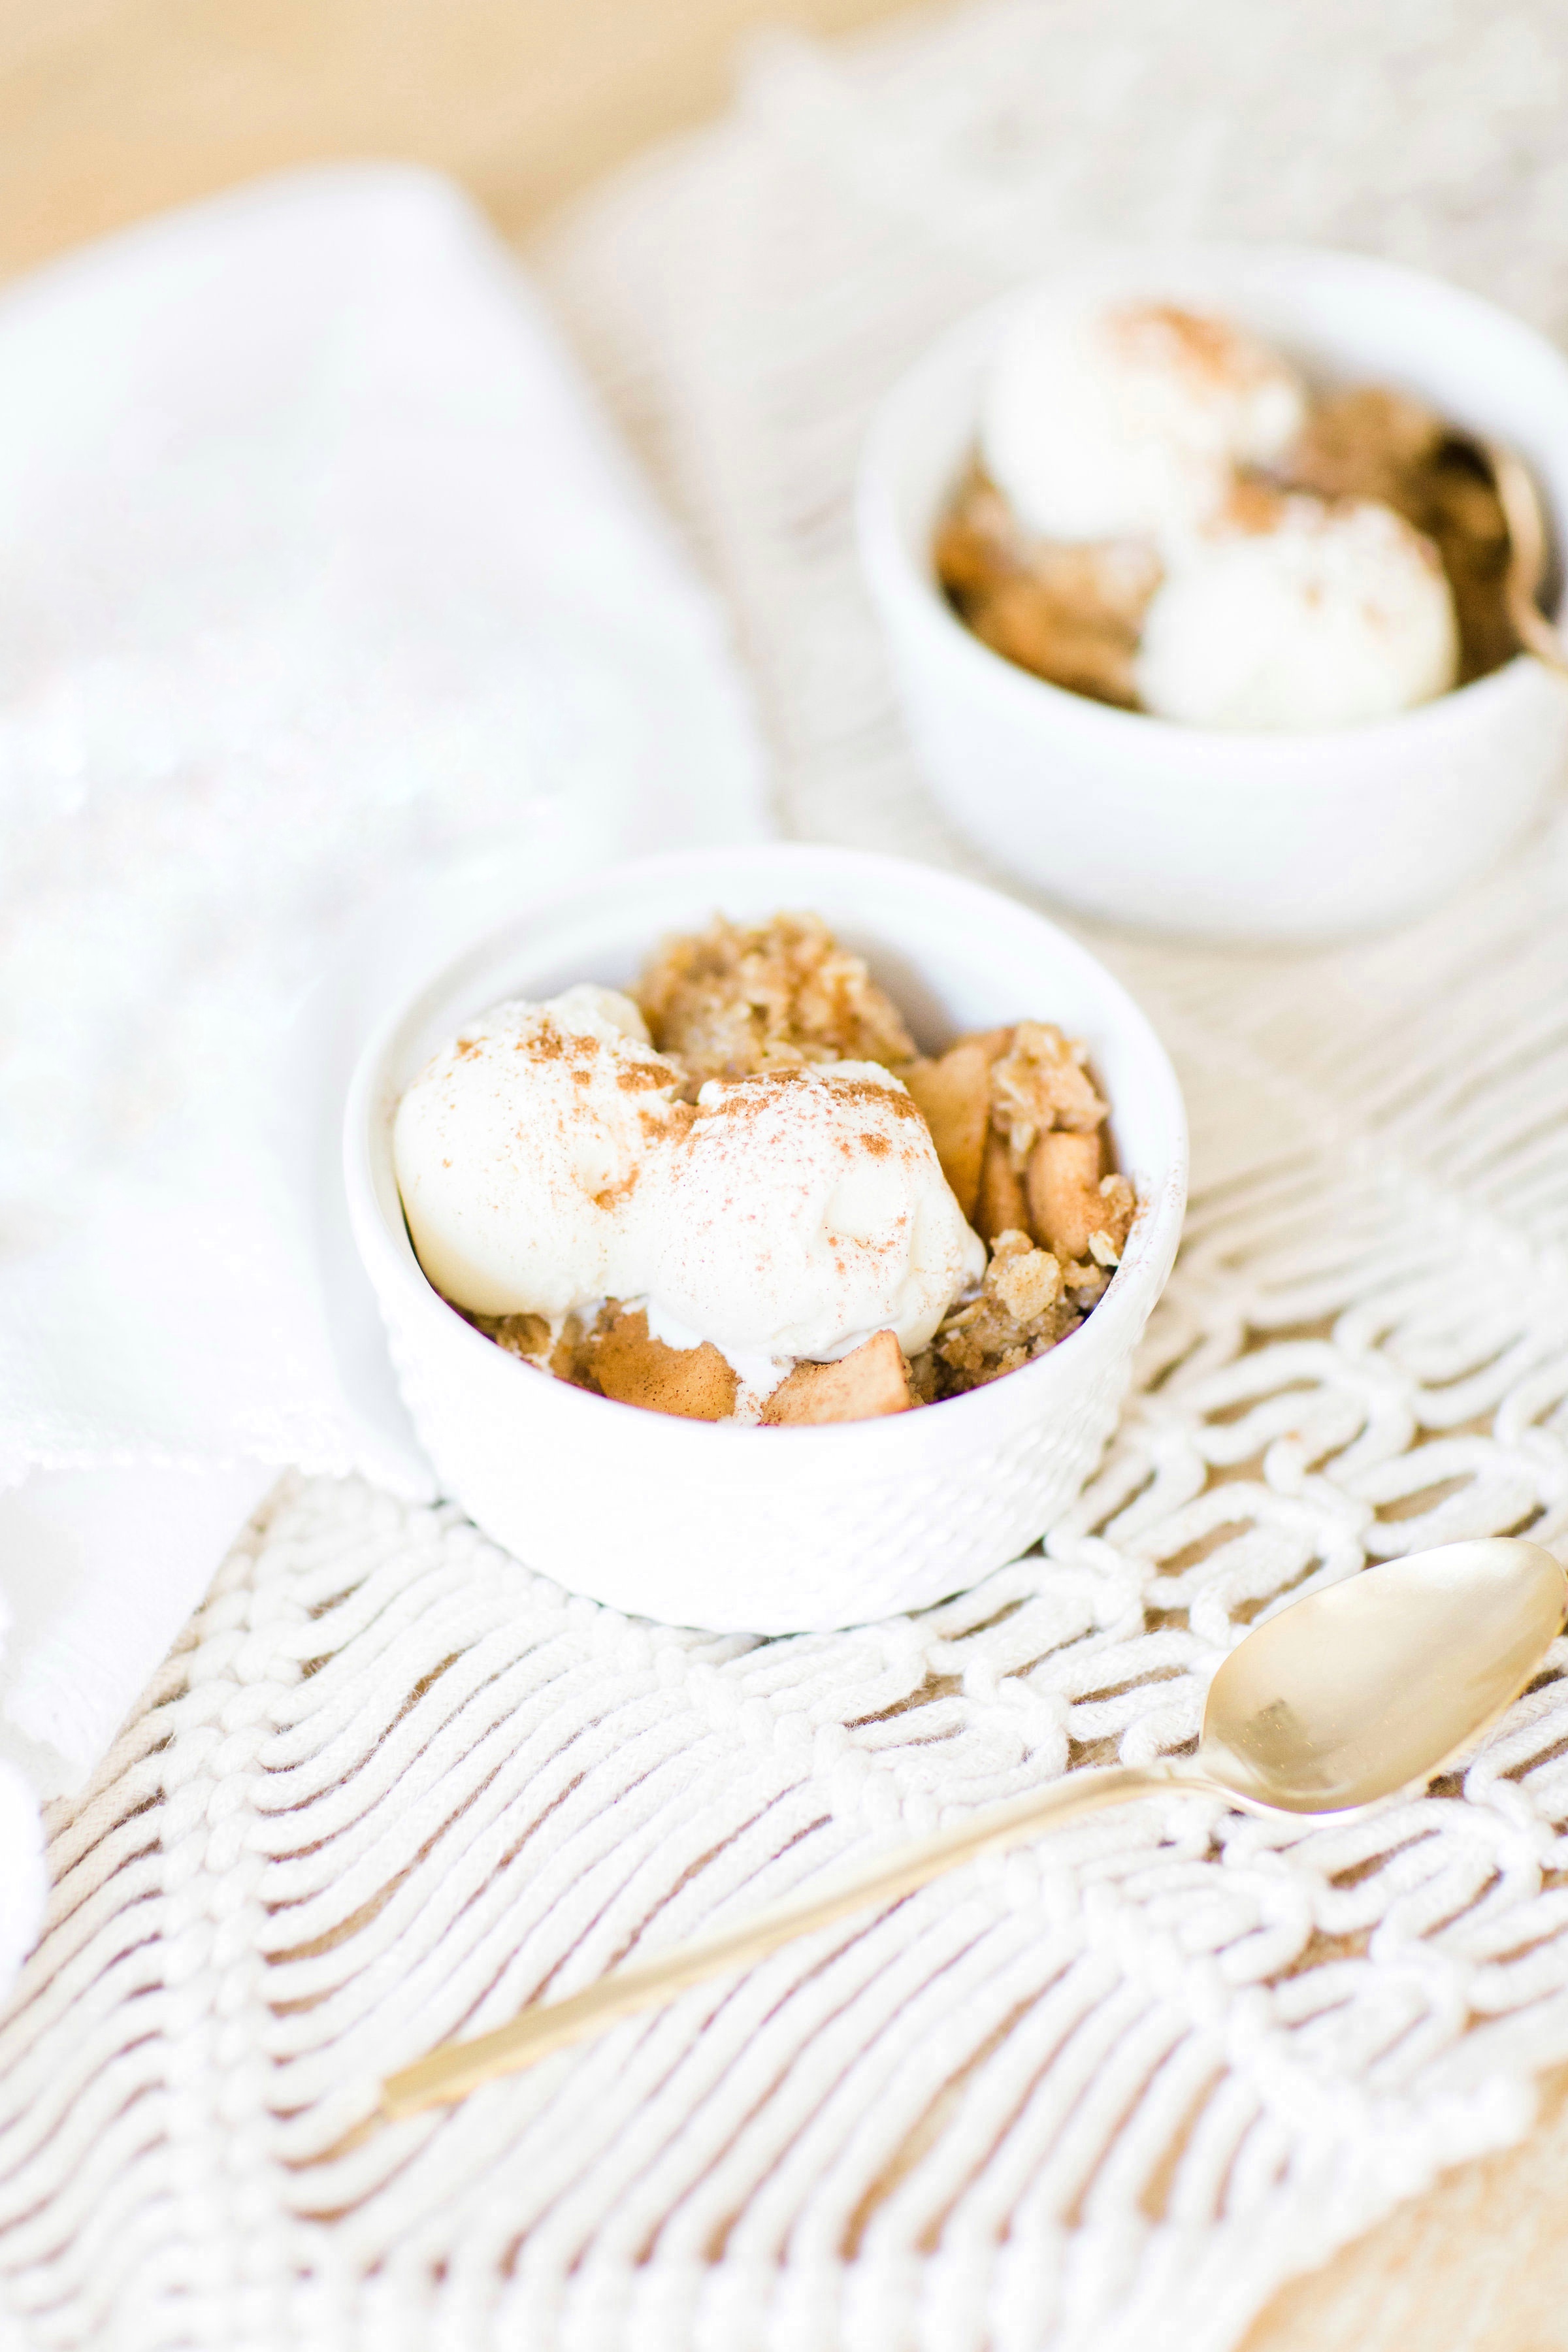 Foodie blogger Lexi of Glitter, Inc. shares how to make no-fuss slow cooker apple crisp, full of juicy apples, warm brown sugar, and a buttery crumbly topping. Click through for the recipe. | glitterinc.com | @glitterinc